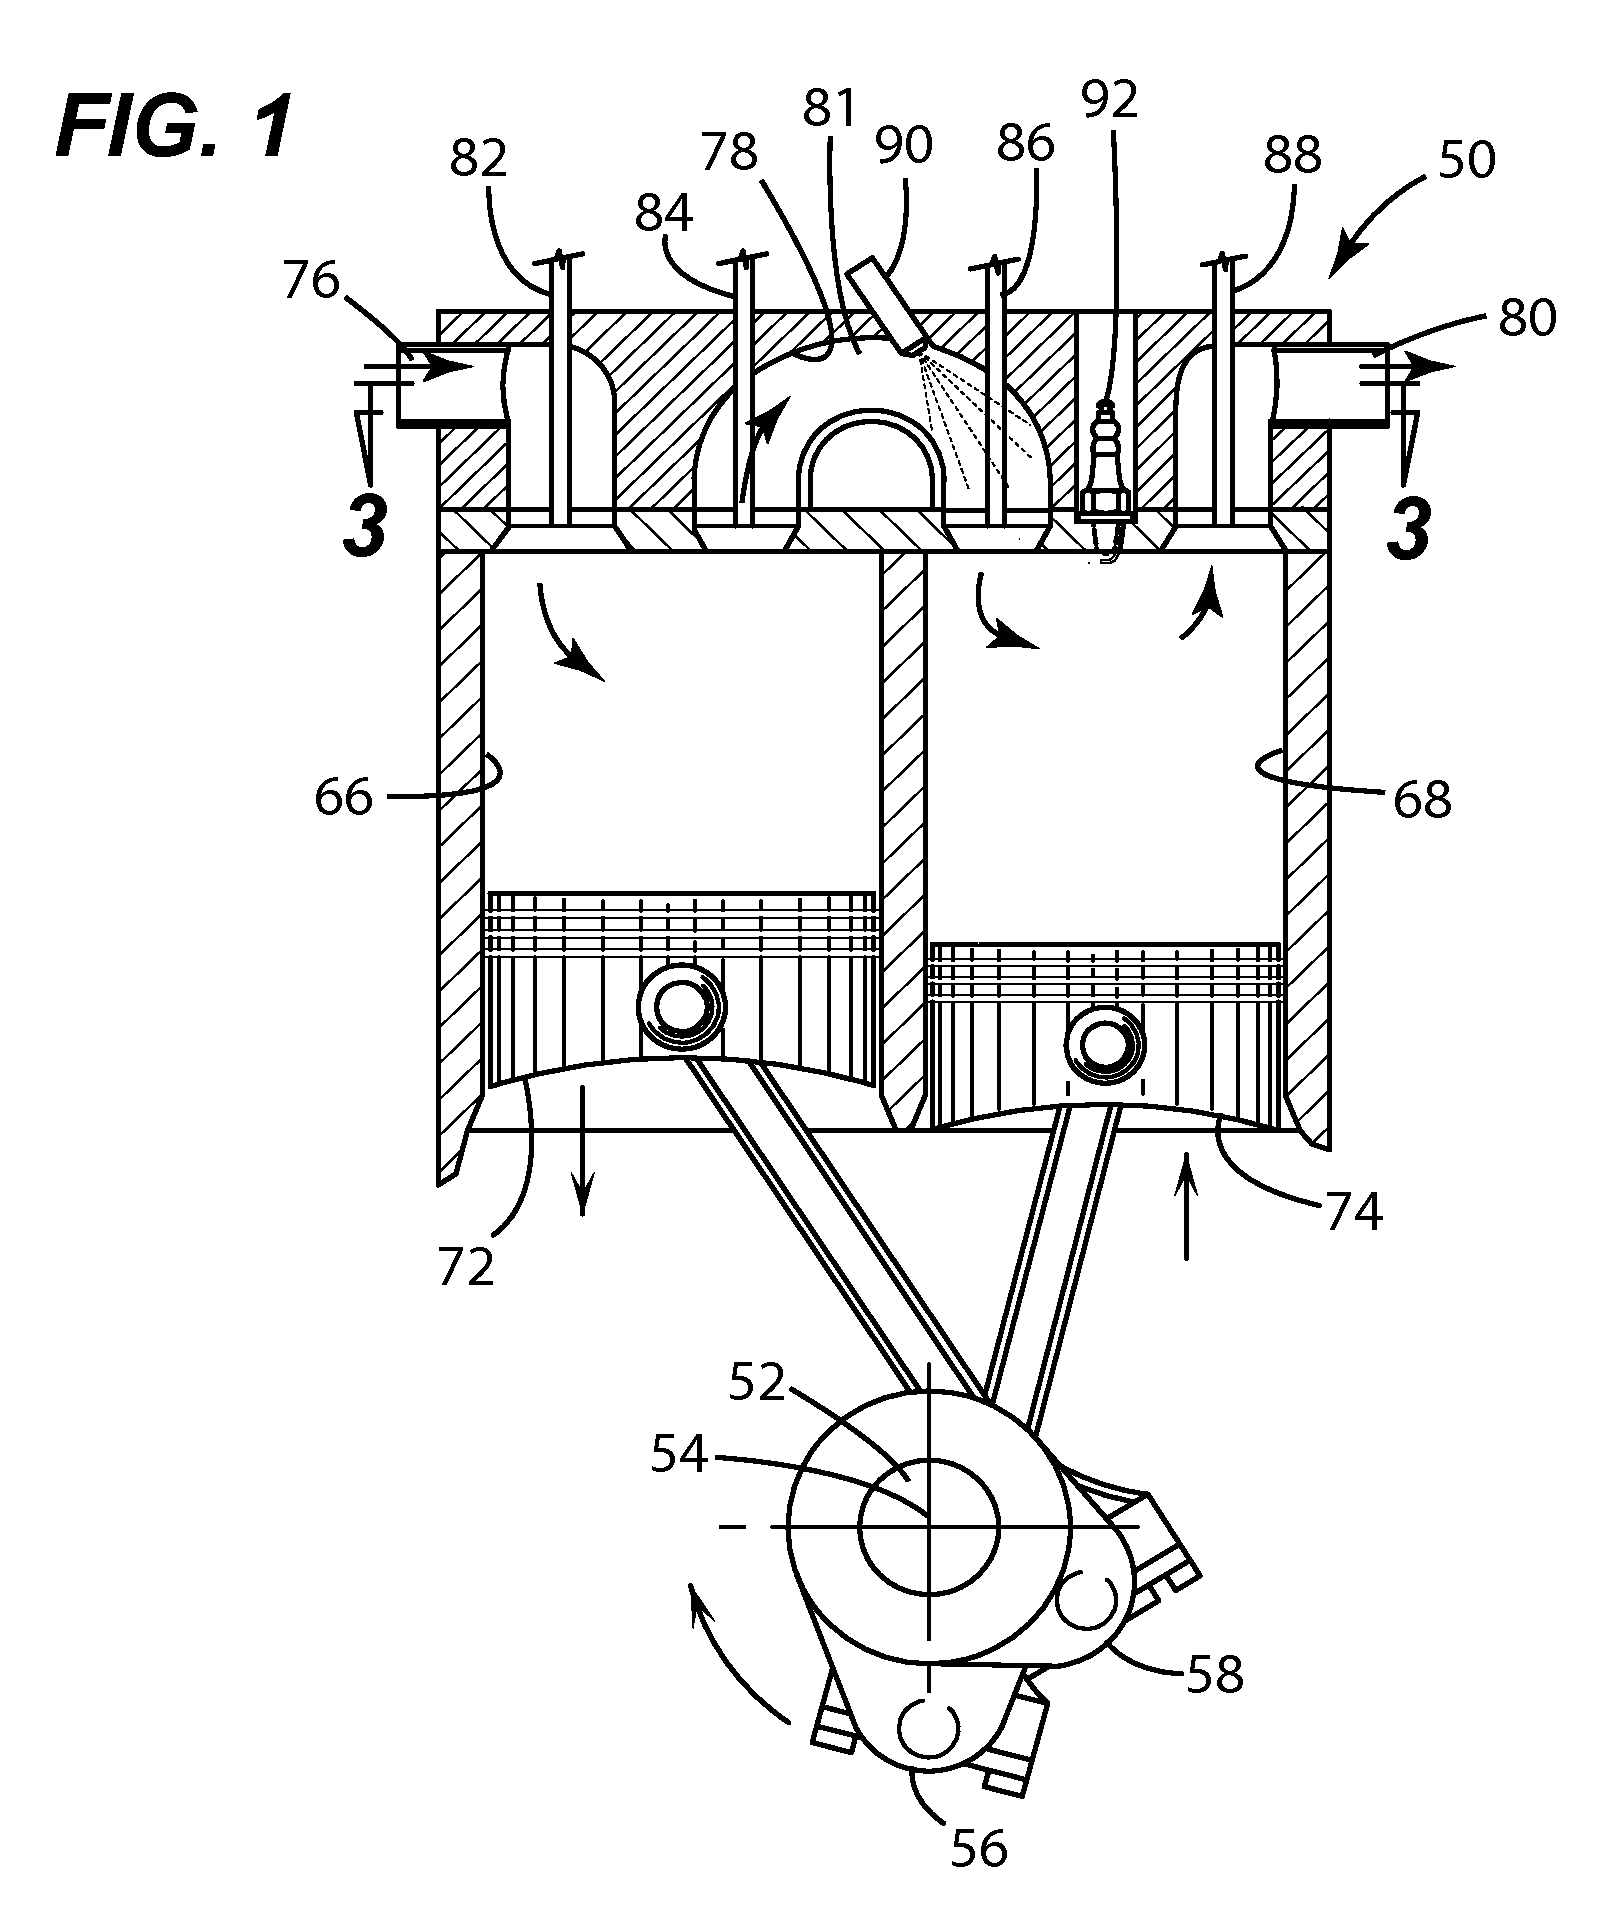 Part-load control in a split-cycle engine